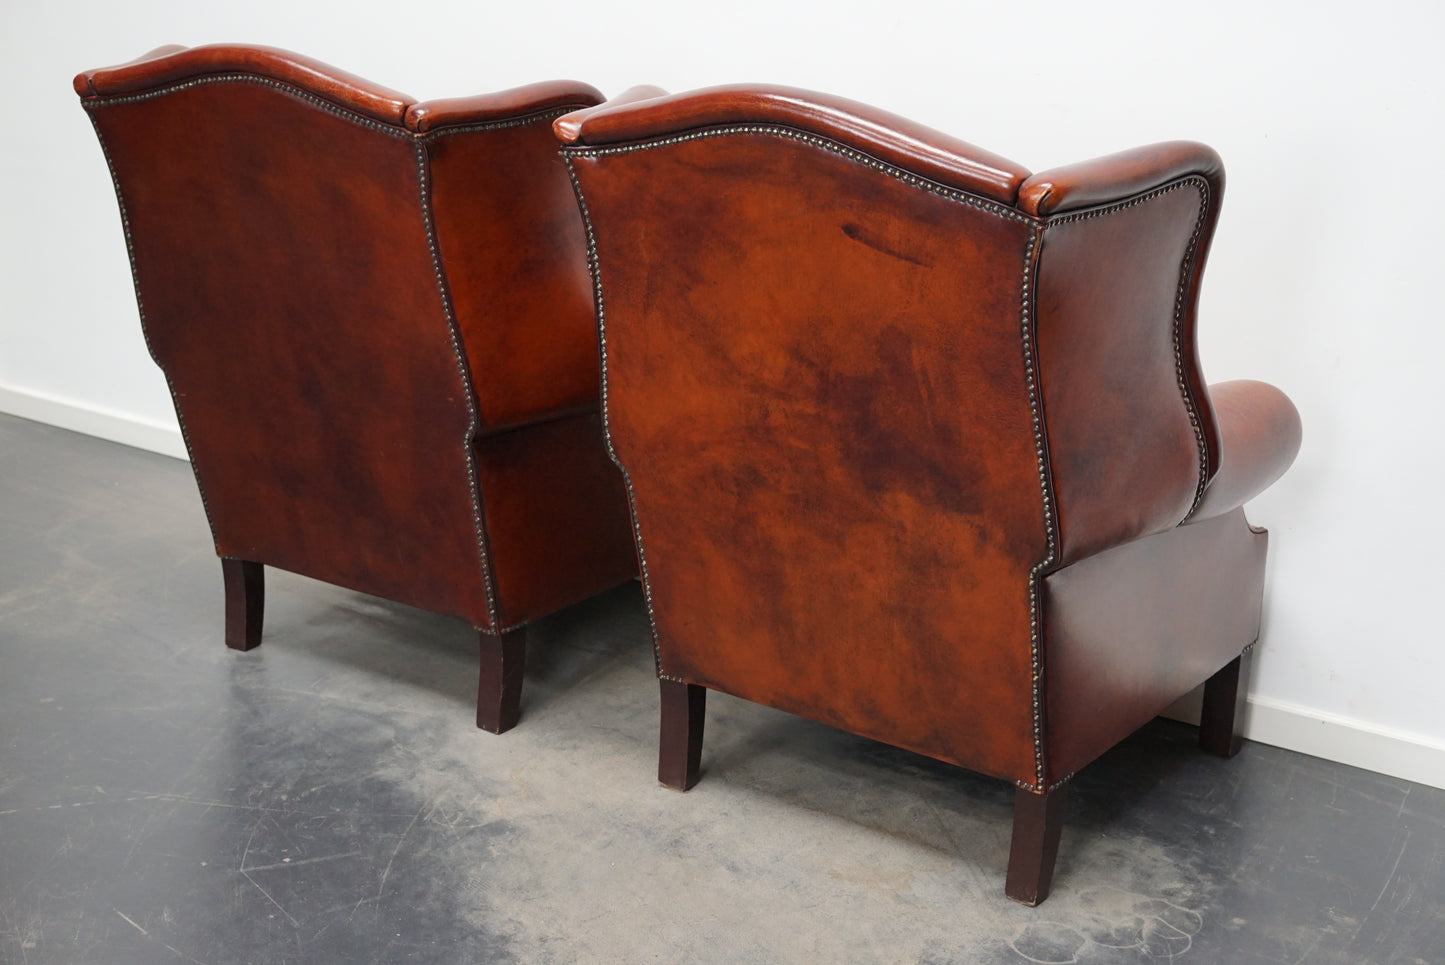 Vintage Dutch Cognac Leather Wingback Club Chairs, Set of 2